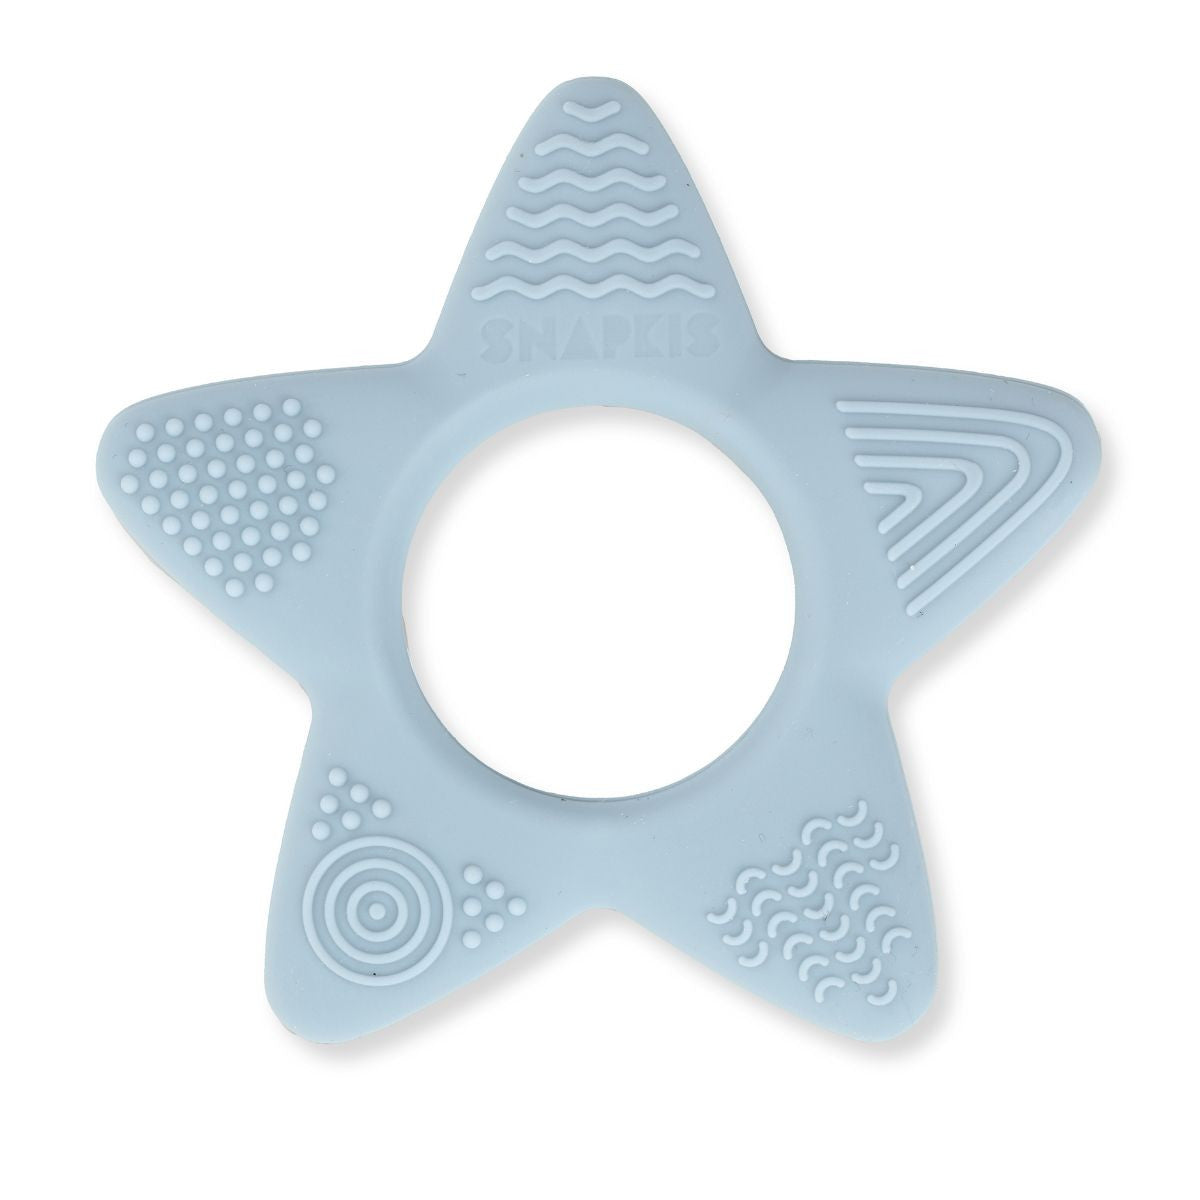 Snapkis Star Silicone Teether - Assorted Colours